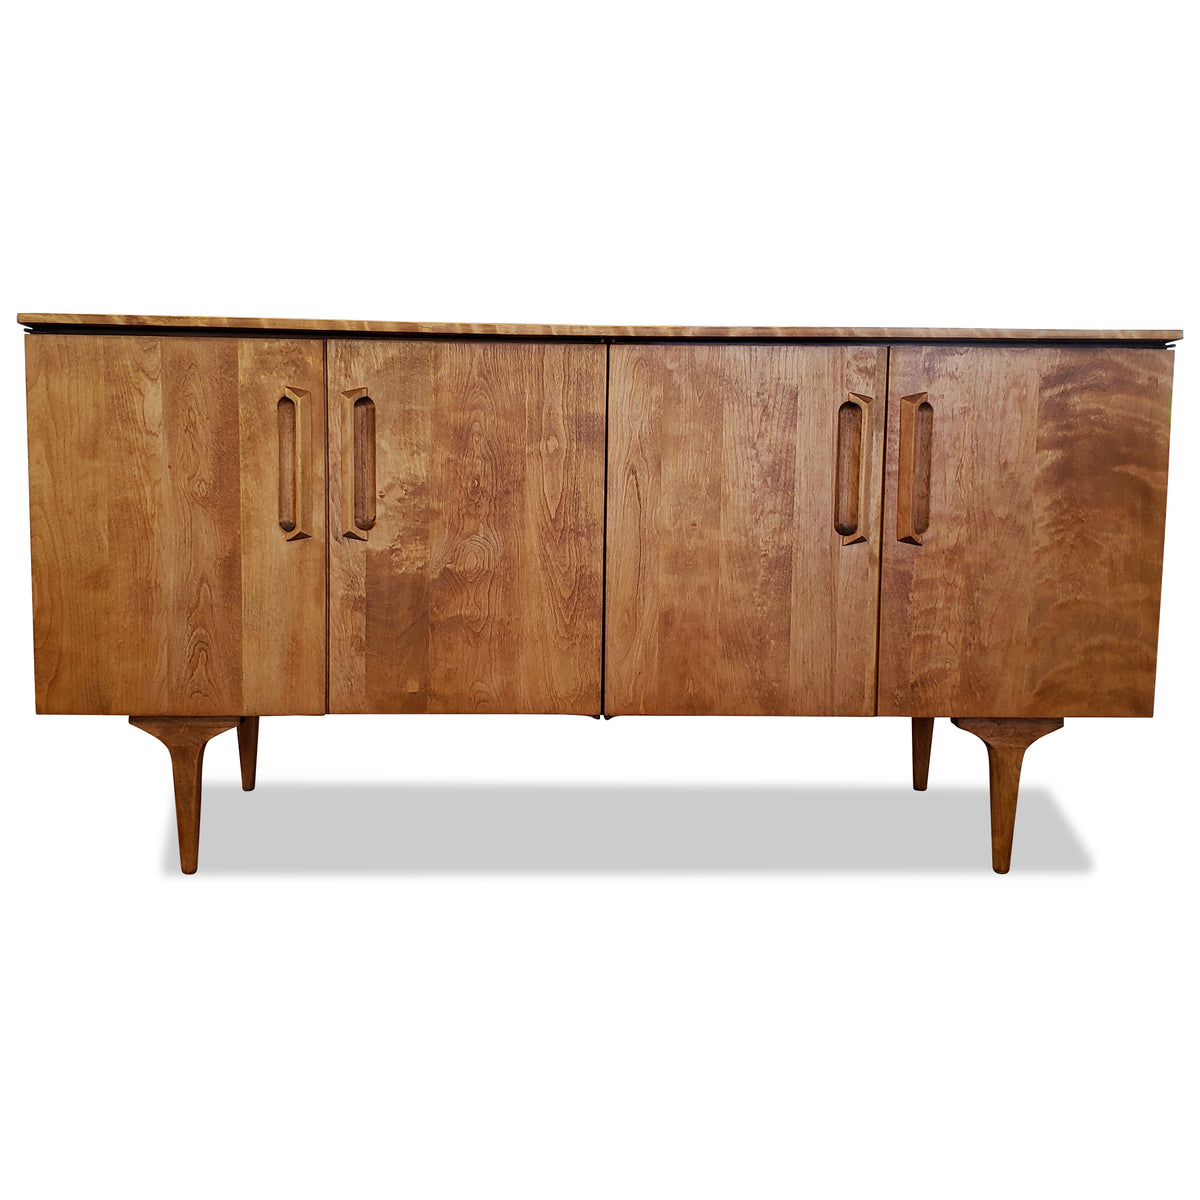 Vintage Solid Maple Sideboard by Jan Kuypers